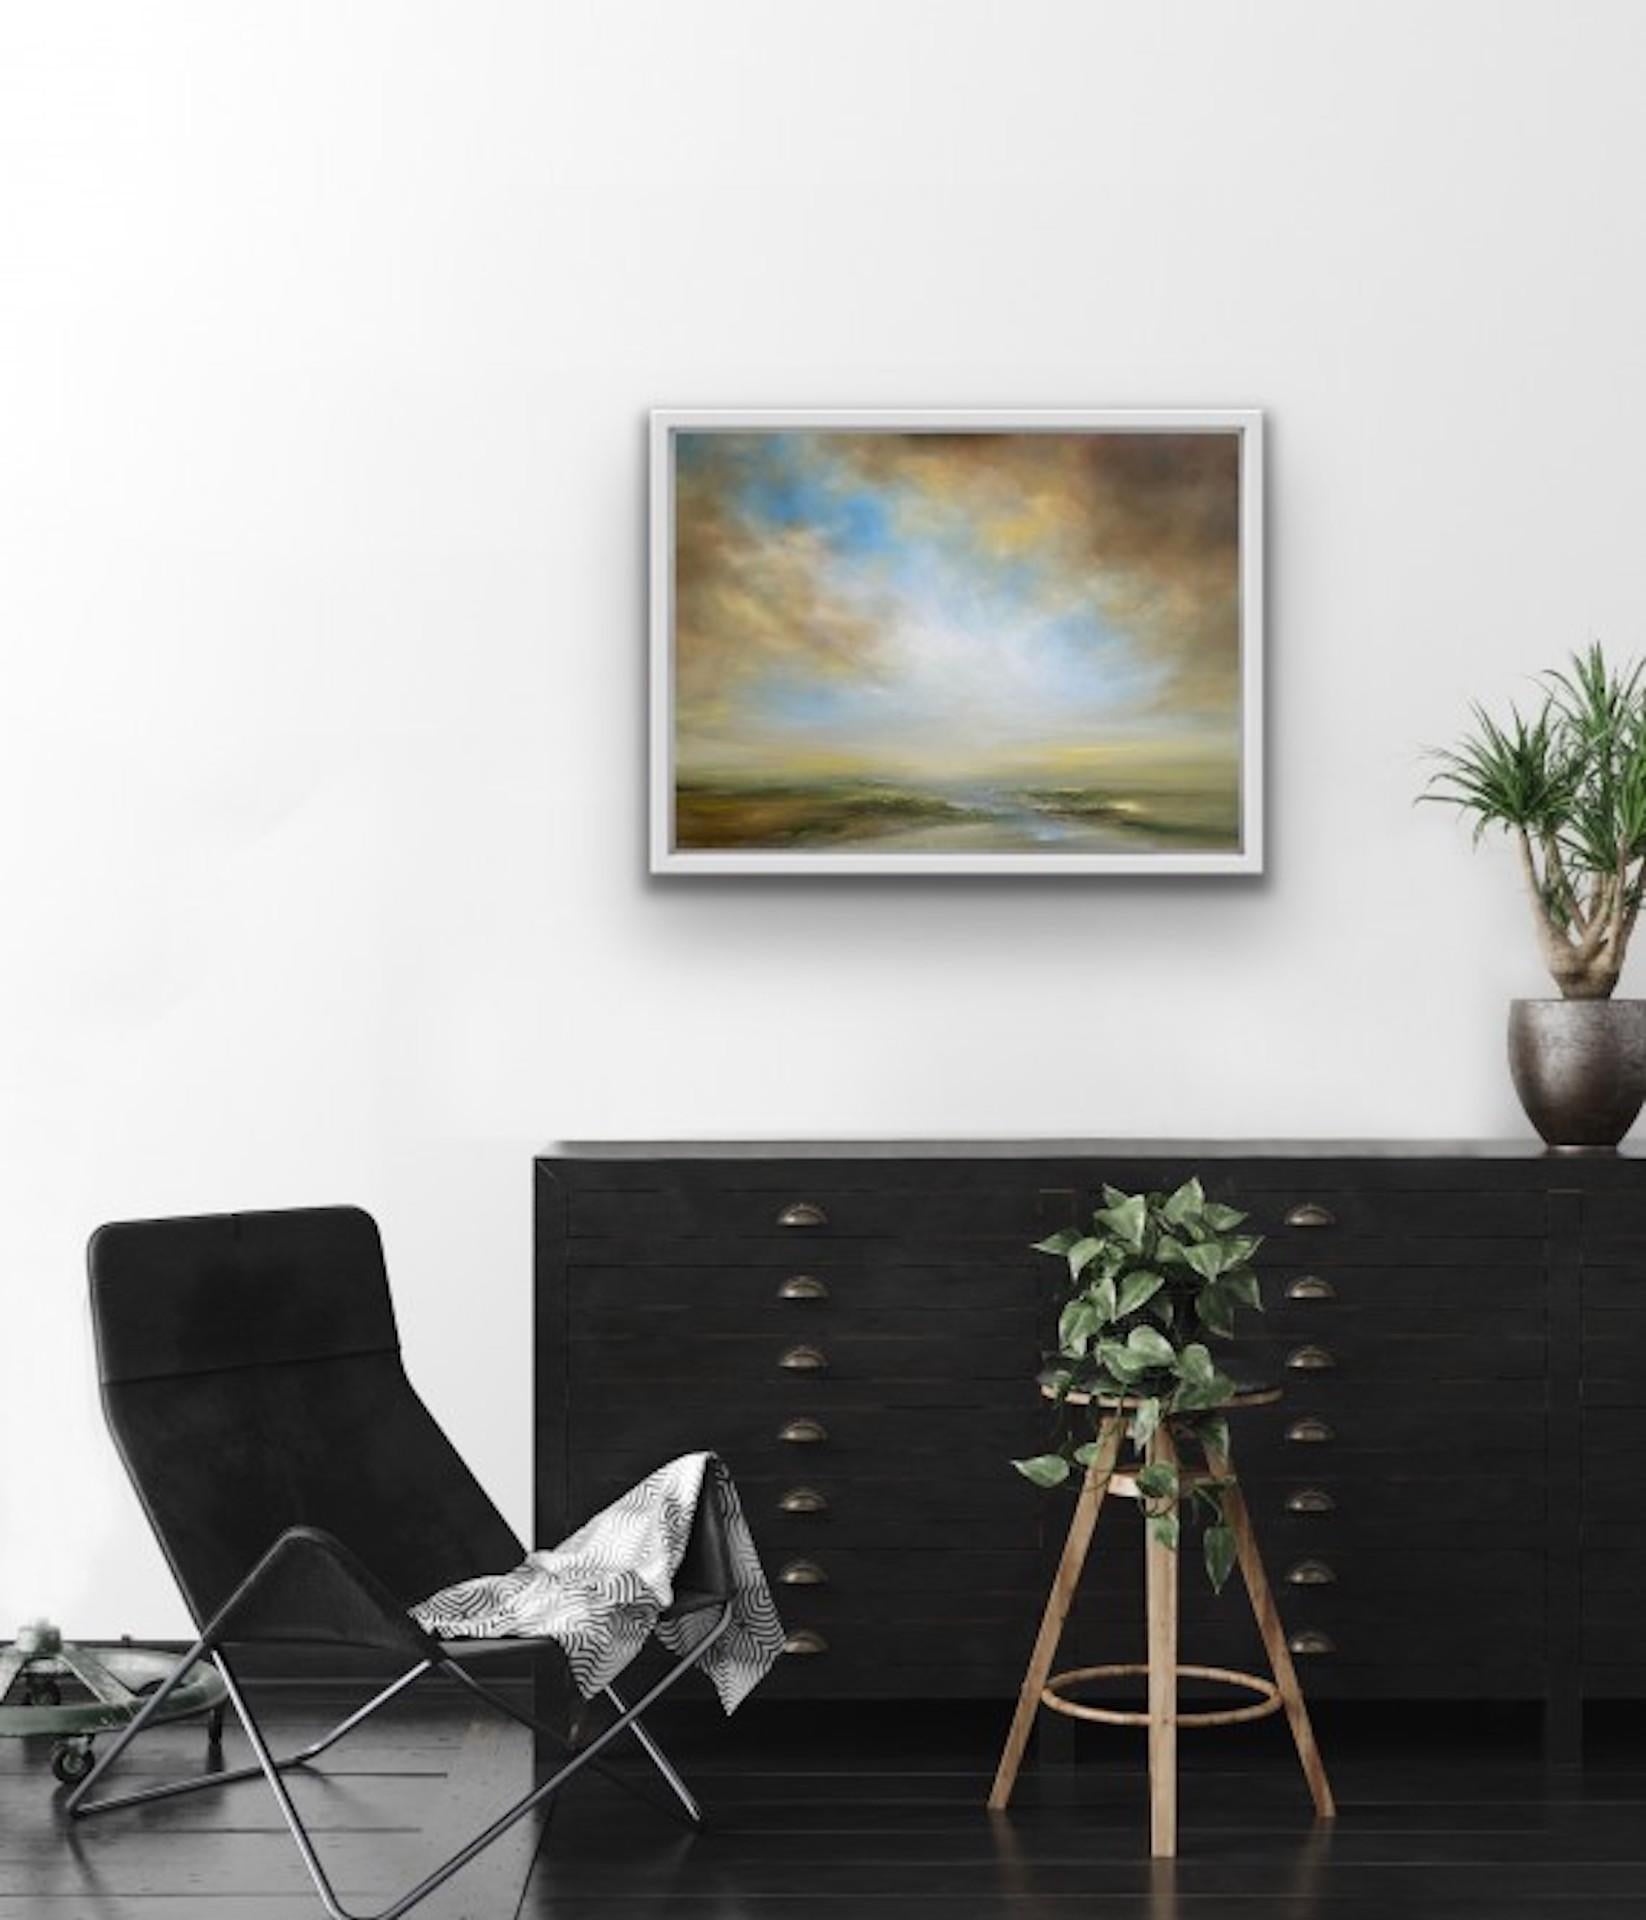 Waters Edge by Laura Dunmow [2020]
Original
Oil on box canvas
Image size: H:50 cm x W:60 cm
Complete Size of Unframed Work: H:50 cm x W:60 cm x D:40cm
Sold Unframed
Please note that insitu images are purely an indication of how a piece may